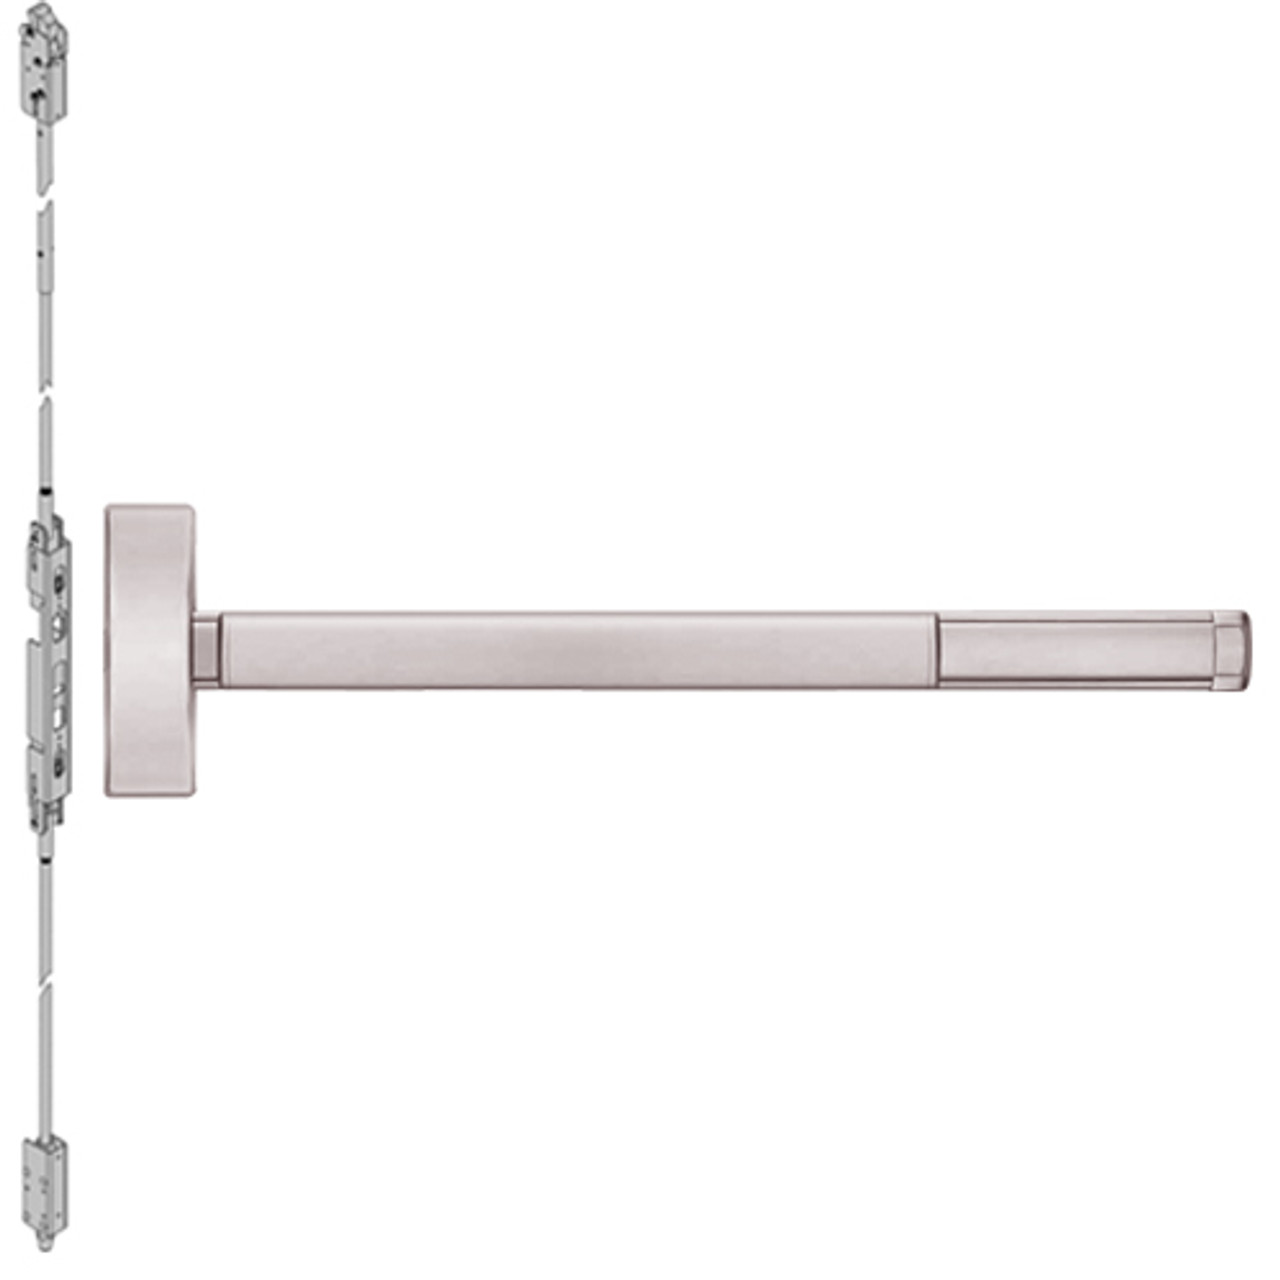 TS2801-628-36 PHI 2800 Series Concealed Vertical Rod Exit Device with Touchbar Monitoring Switch Prepped for Cover Plate in Satin Aluminum Finish